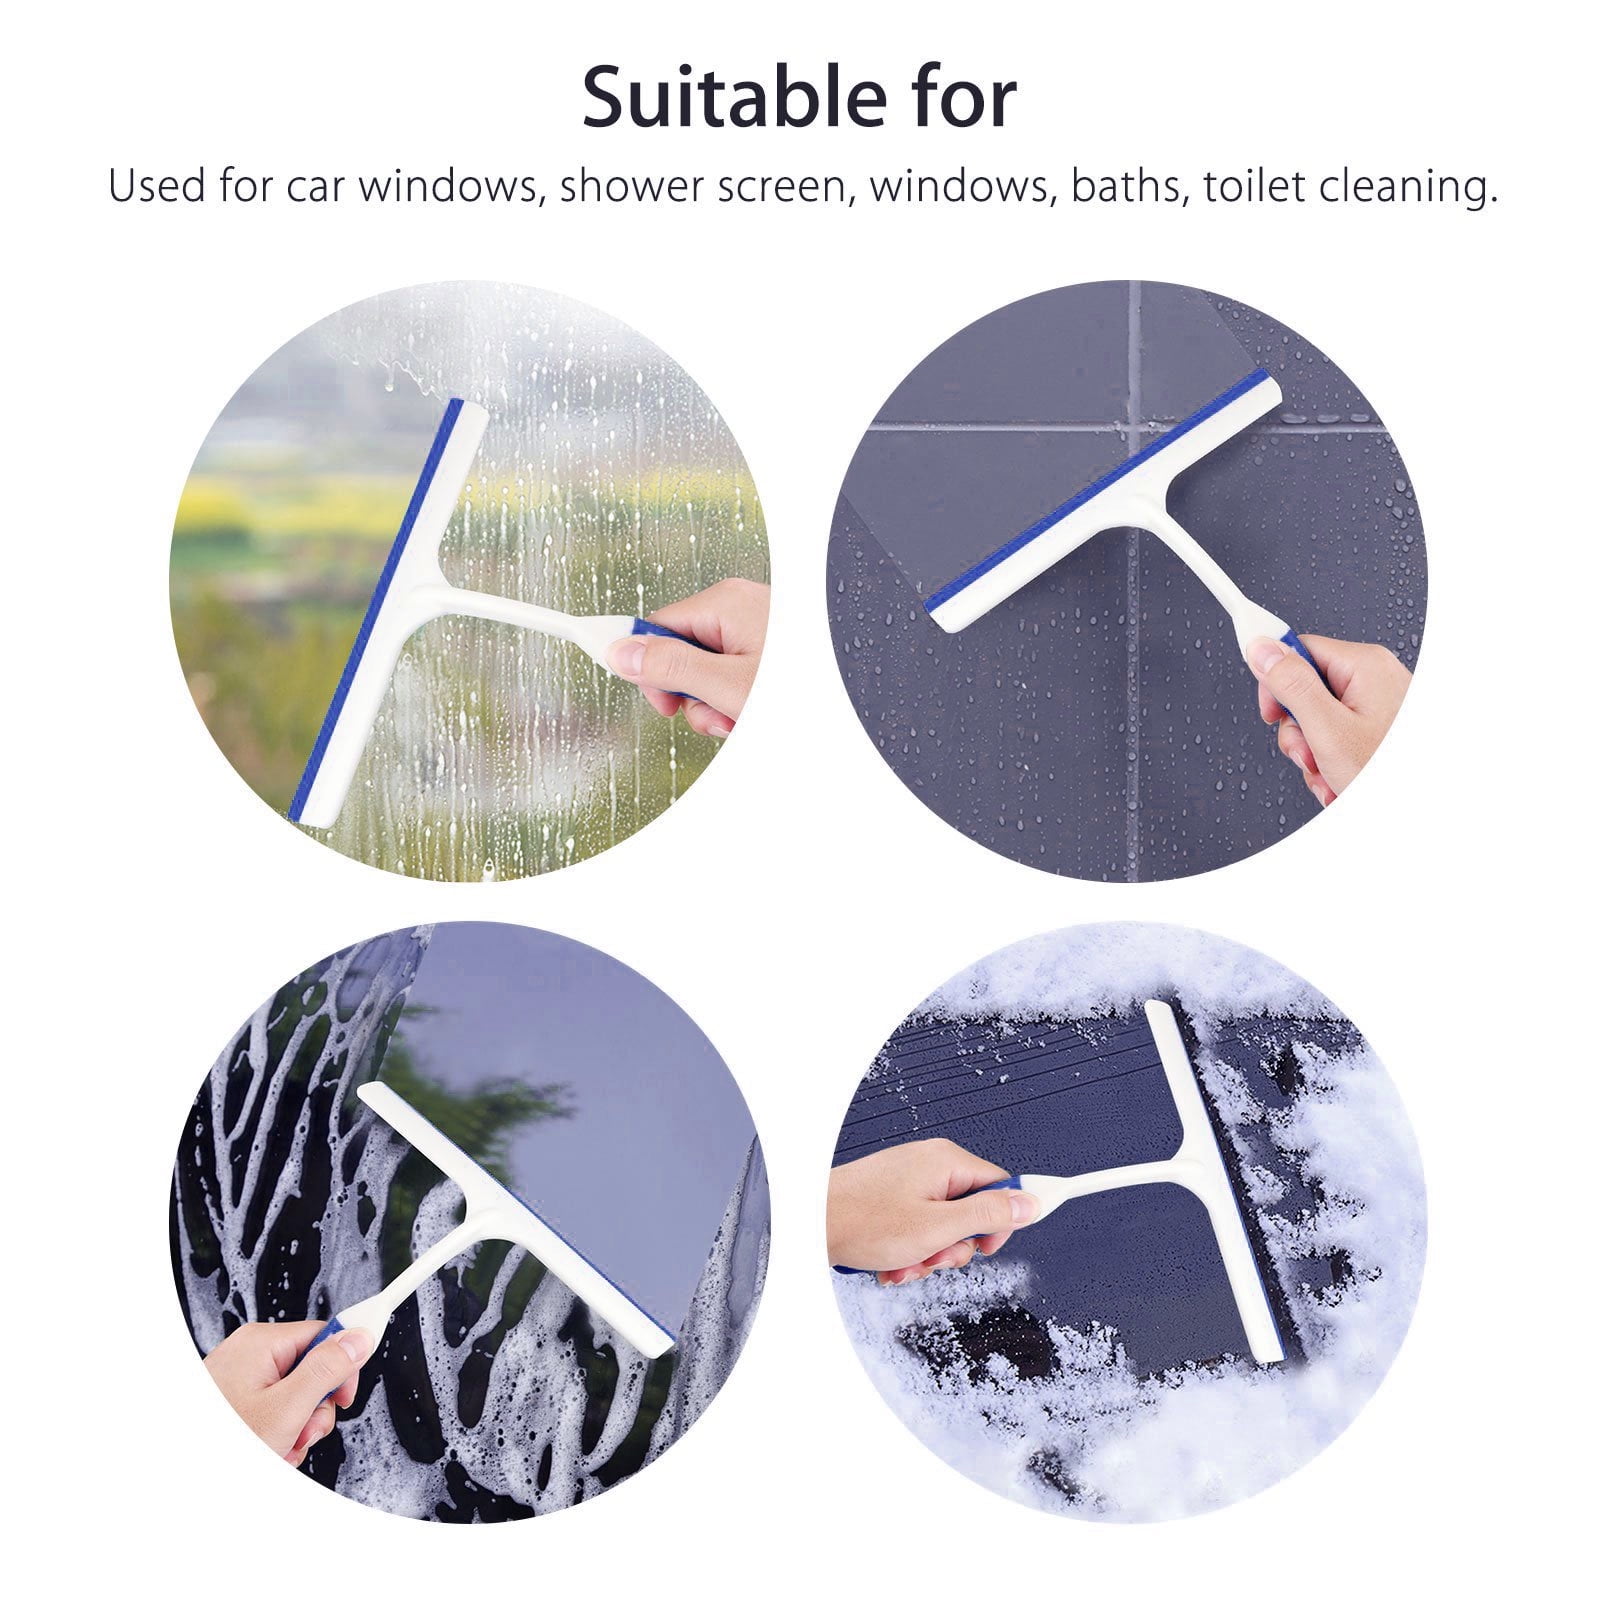 DOITOOL 10 Pcs Glass Scraper Squeegees Mirror Cleaner Tool Auto Water  Silicon Squeegee Scrapers Wallpaper Tools Window Tint Scraper Abzieher  Plastic